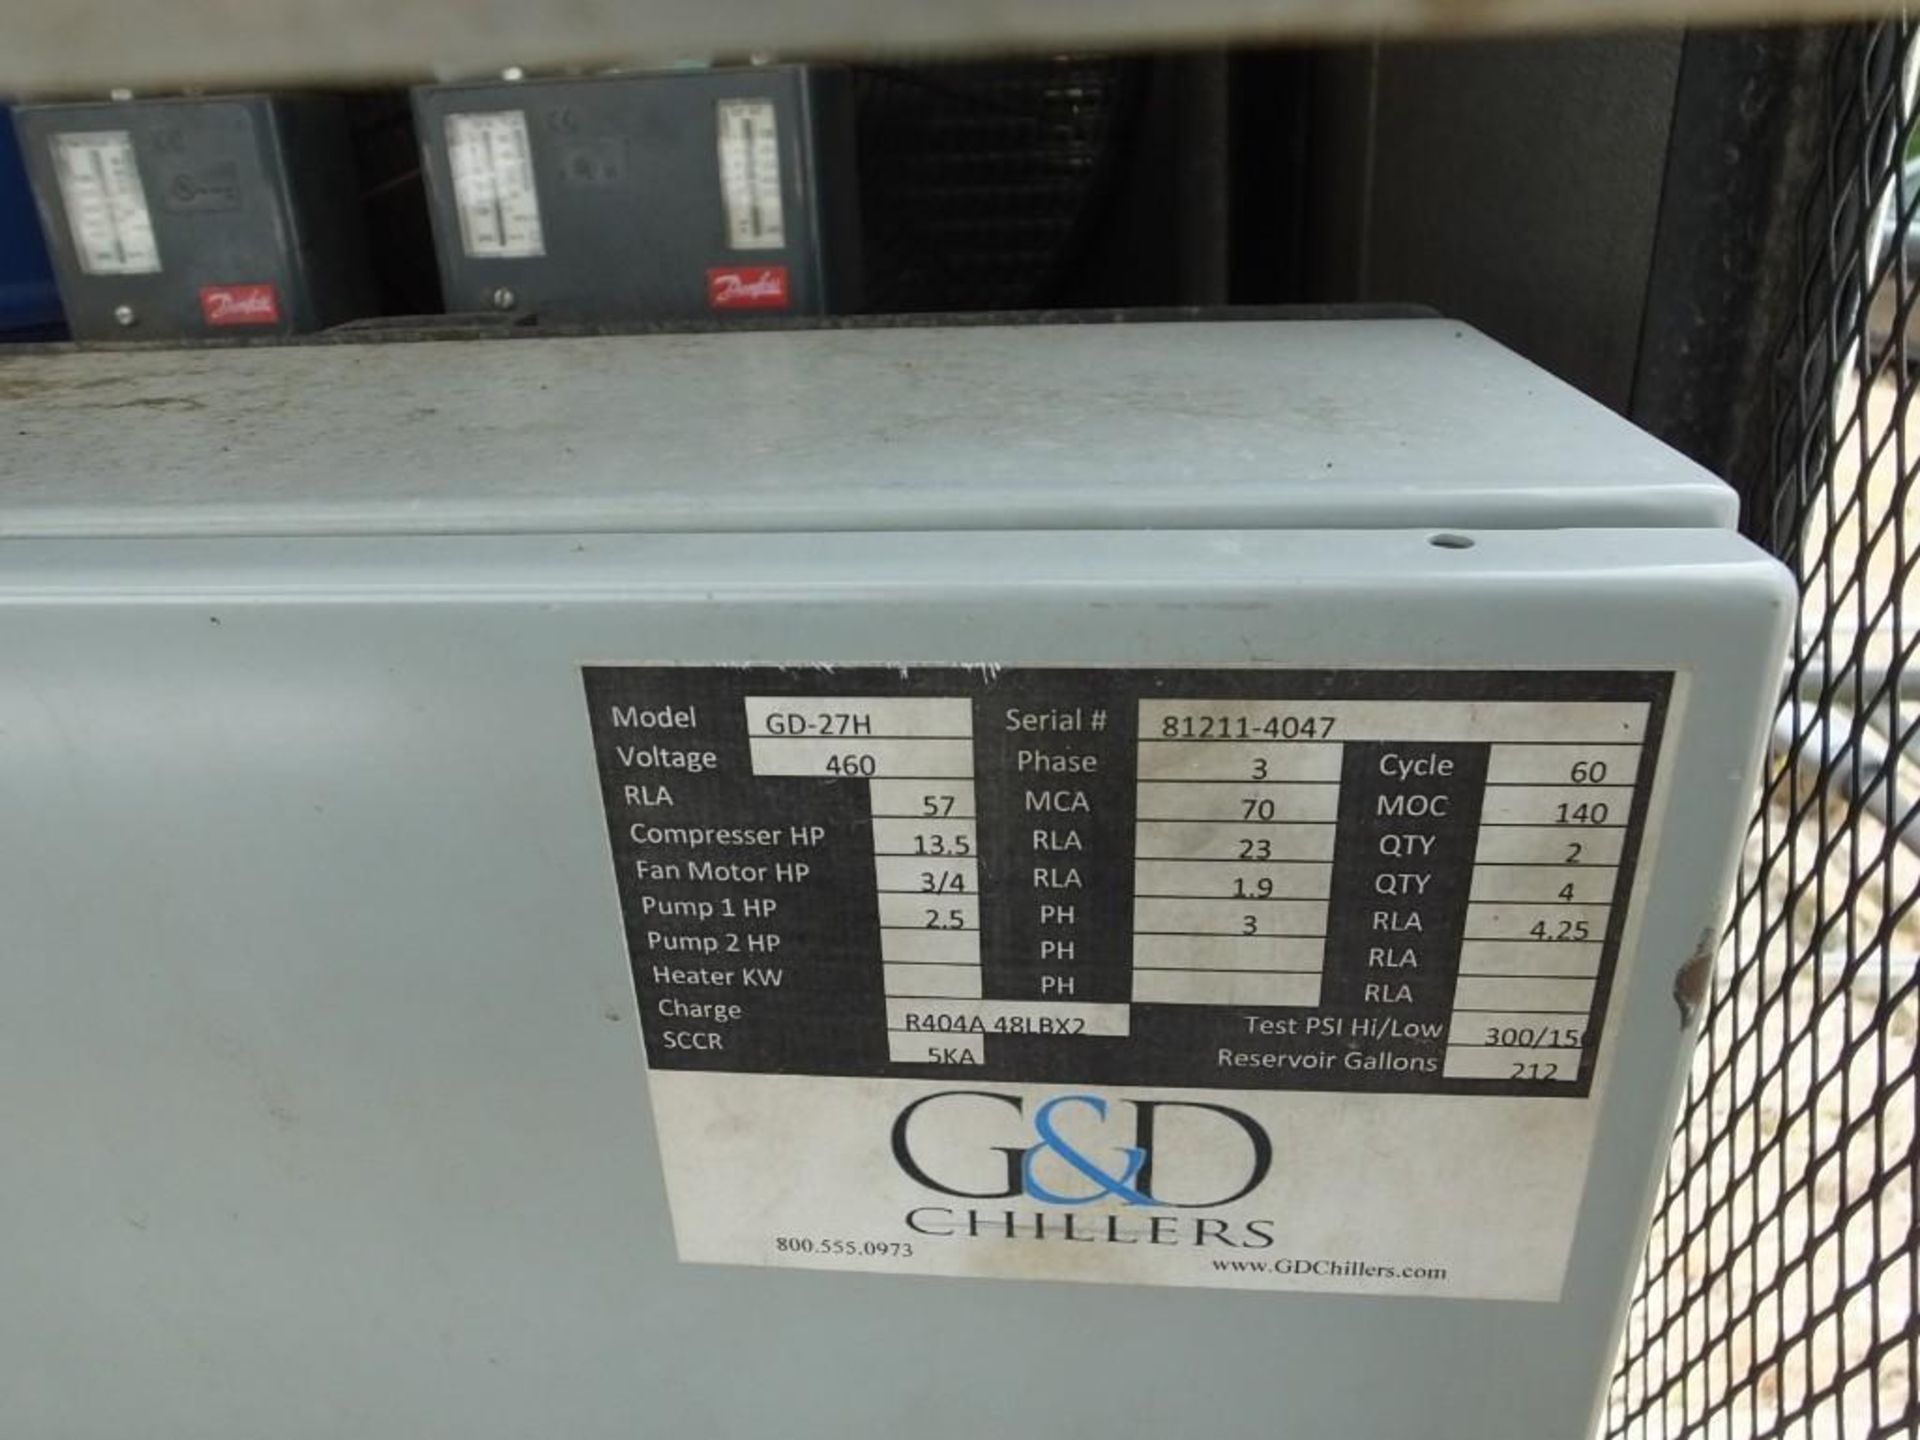 2010 G&D Chillers GD-27H Multi-Stage Chiller - Image 3 of 6